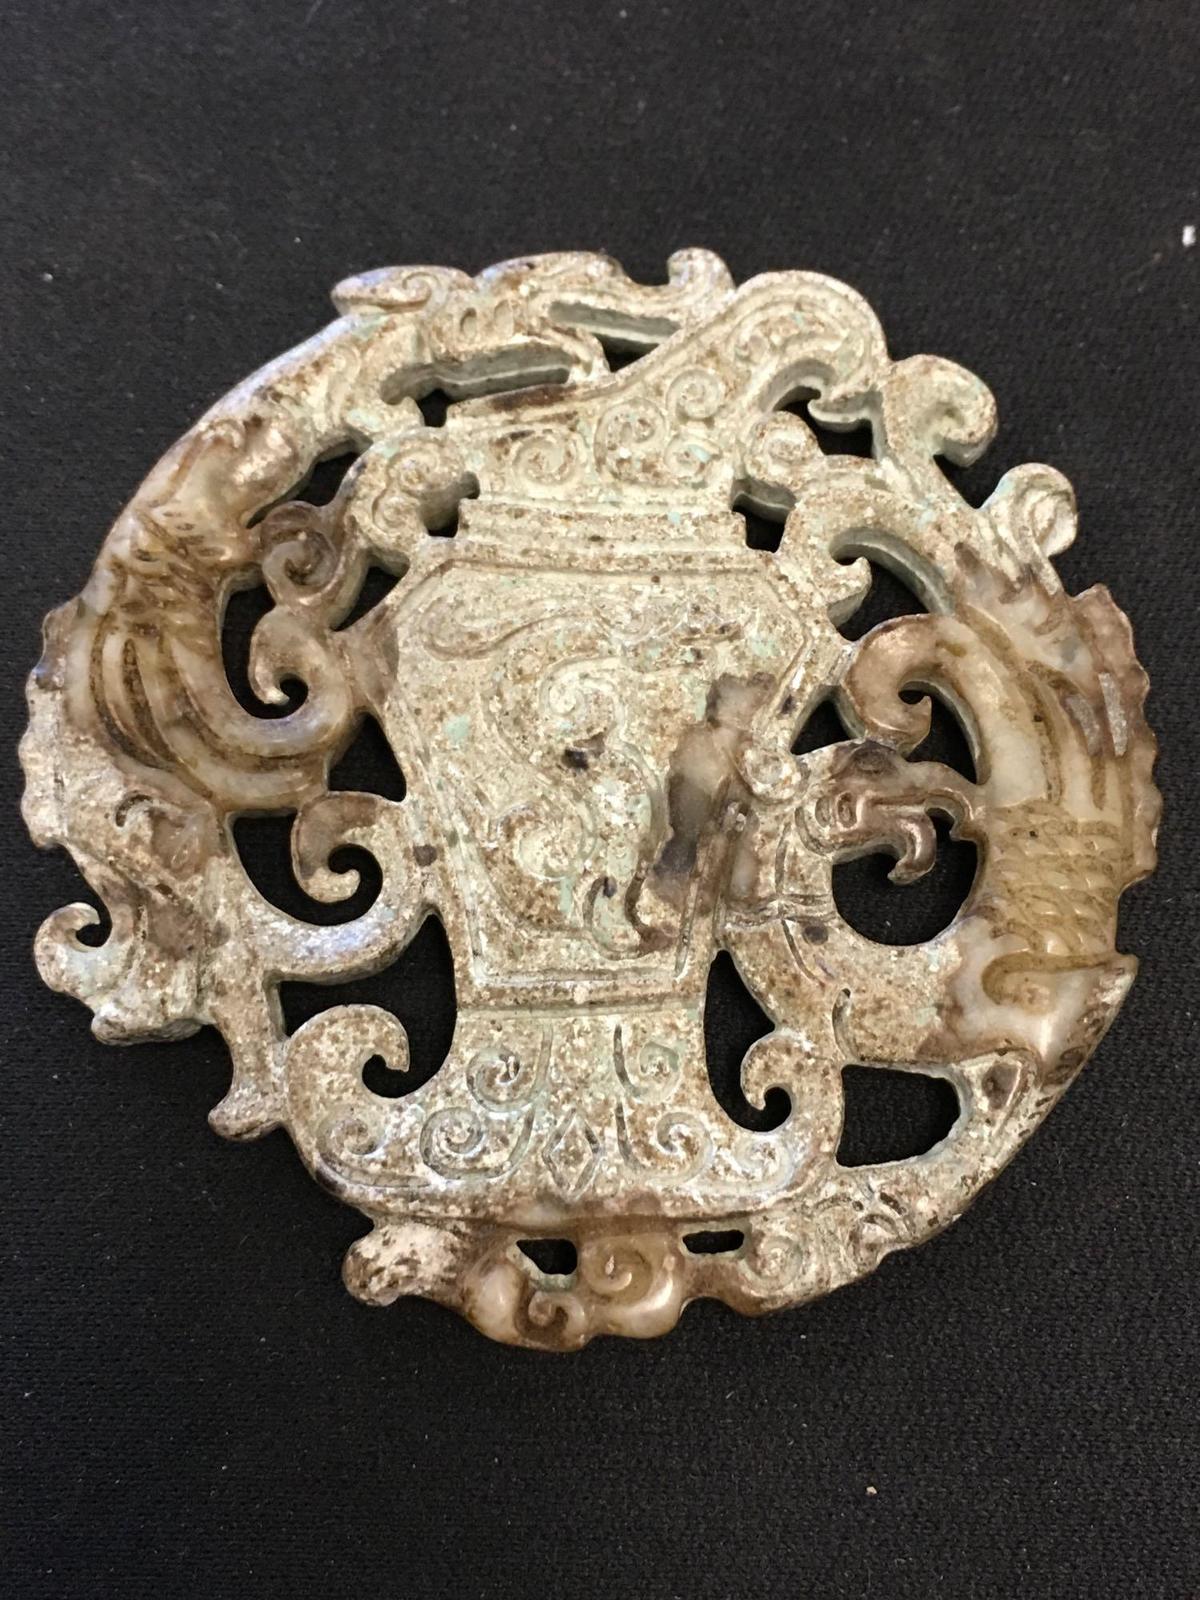 Dragon & Urn Asian Styled Hand-Carved 55 mm Jade Medallion - 23 Grams